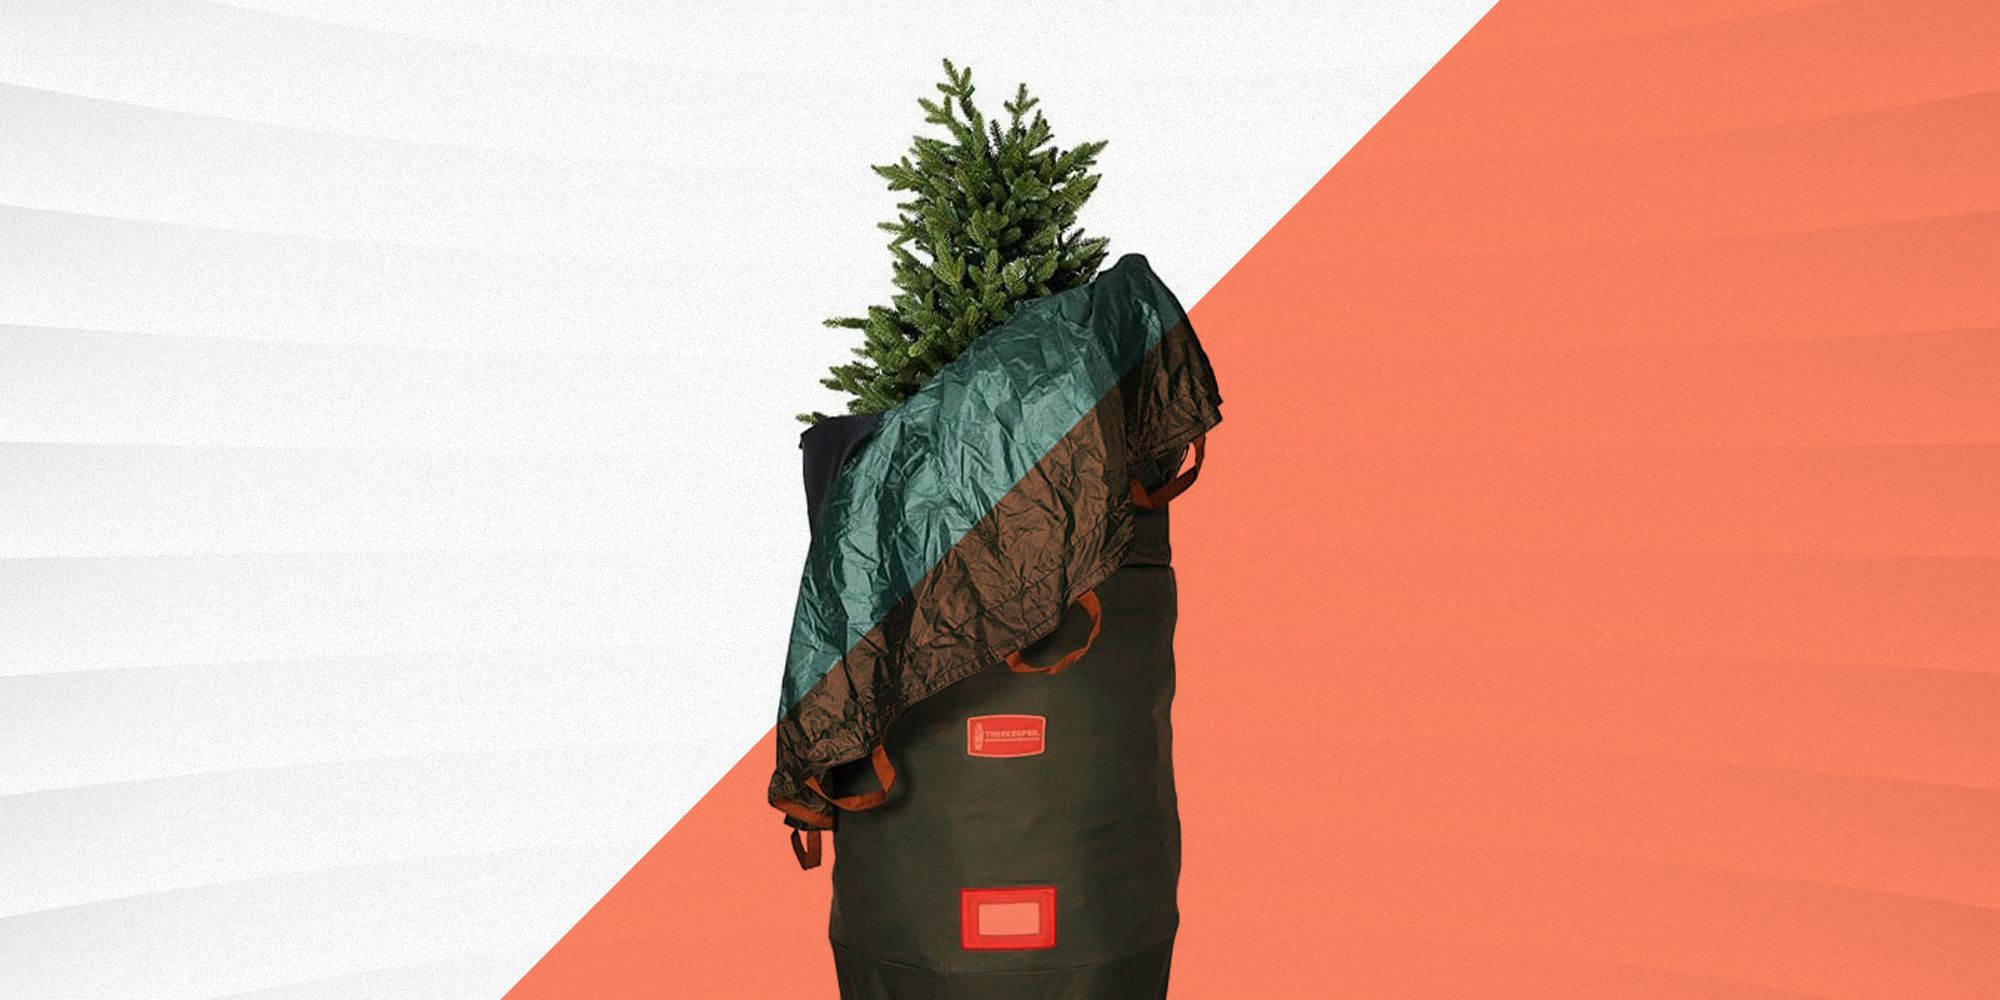 somubi Green Christmas Tree Storage Bag,Heavy Duty Oxford Cloth Xmas Tree Bag with Zippered&Reinforced Handles Fits 7ft Tall 